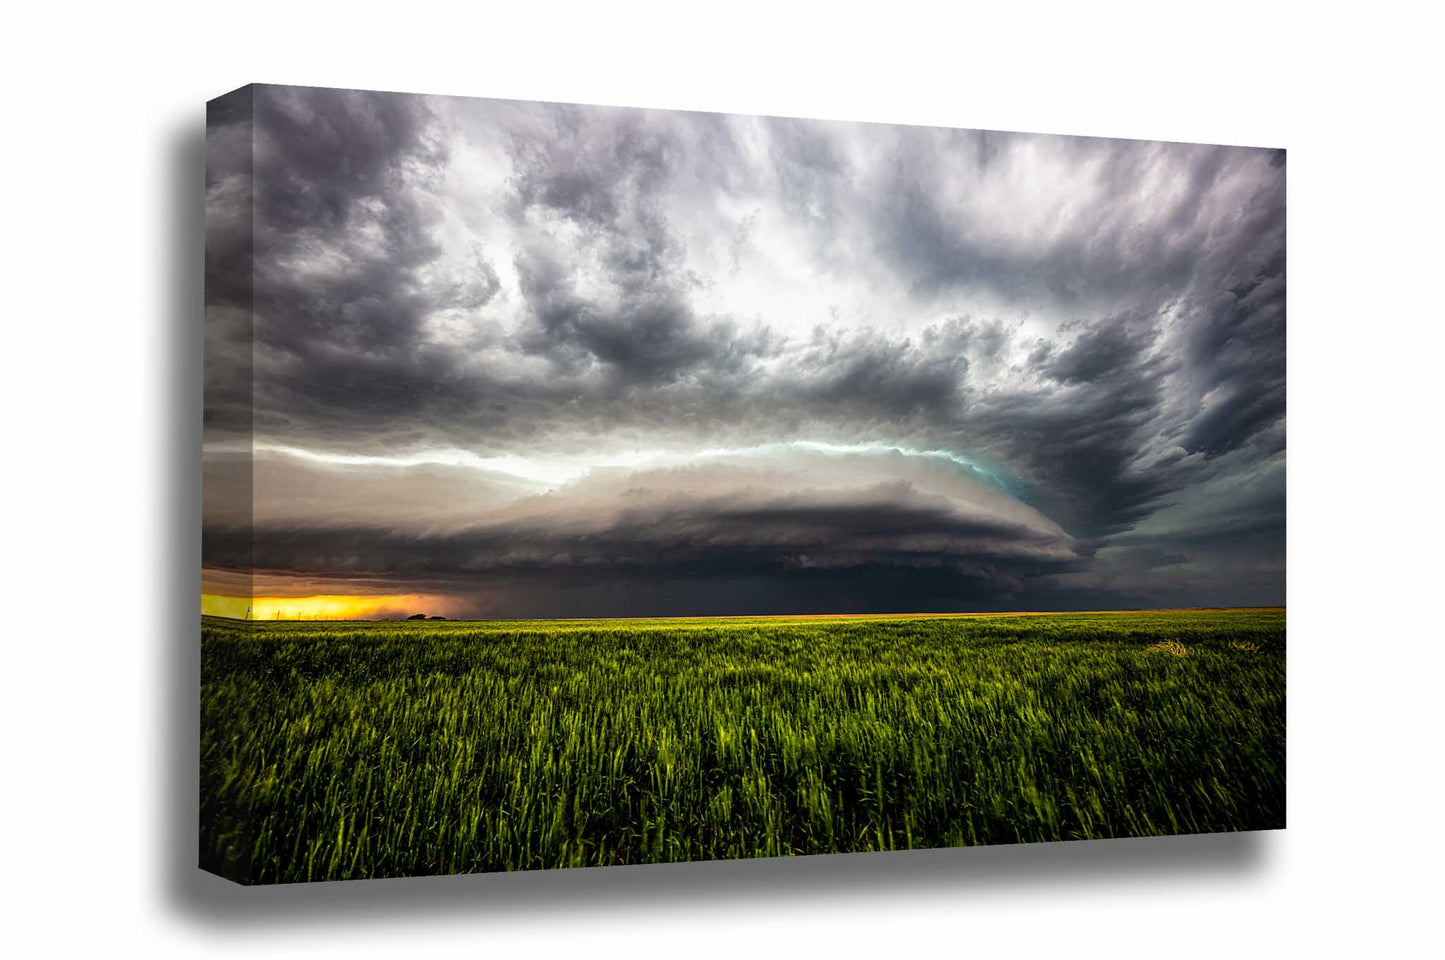 Storm canvas wall art of a supercell thunderstorm over a wheat field on a stormy spring evening in Kansas by Sean Ramsey of Southern Plains Photography.